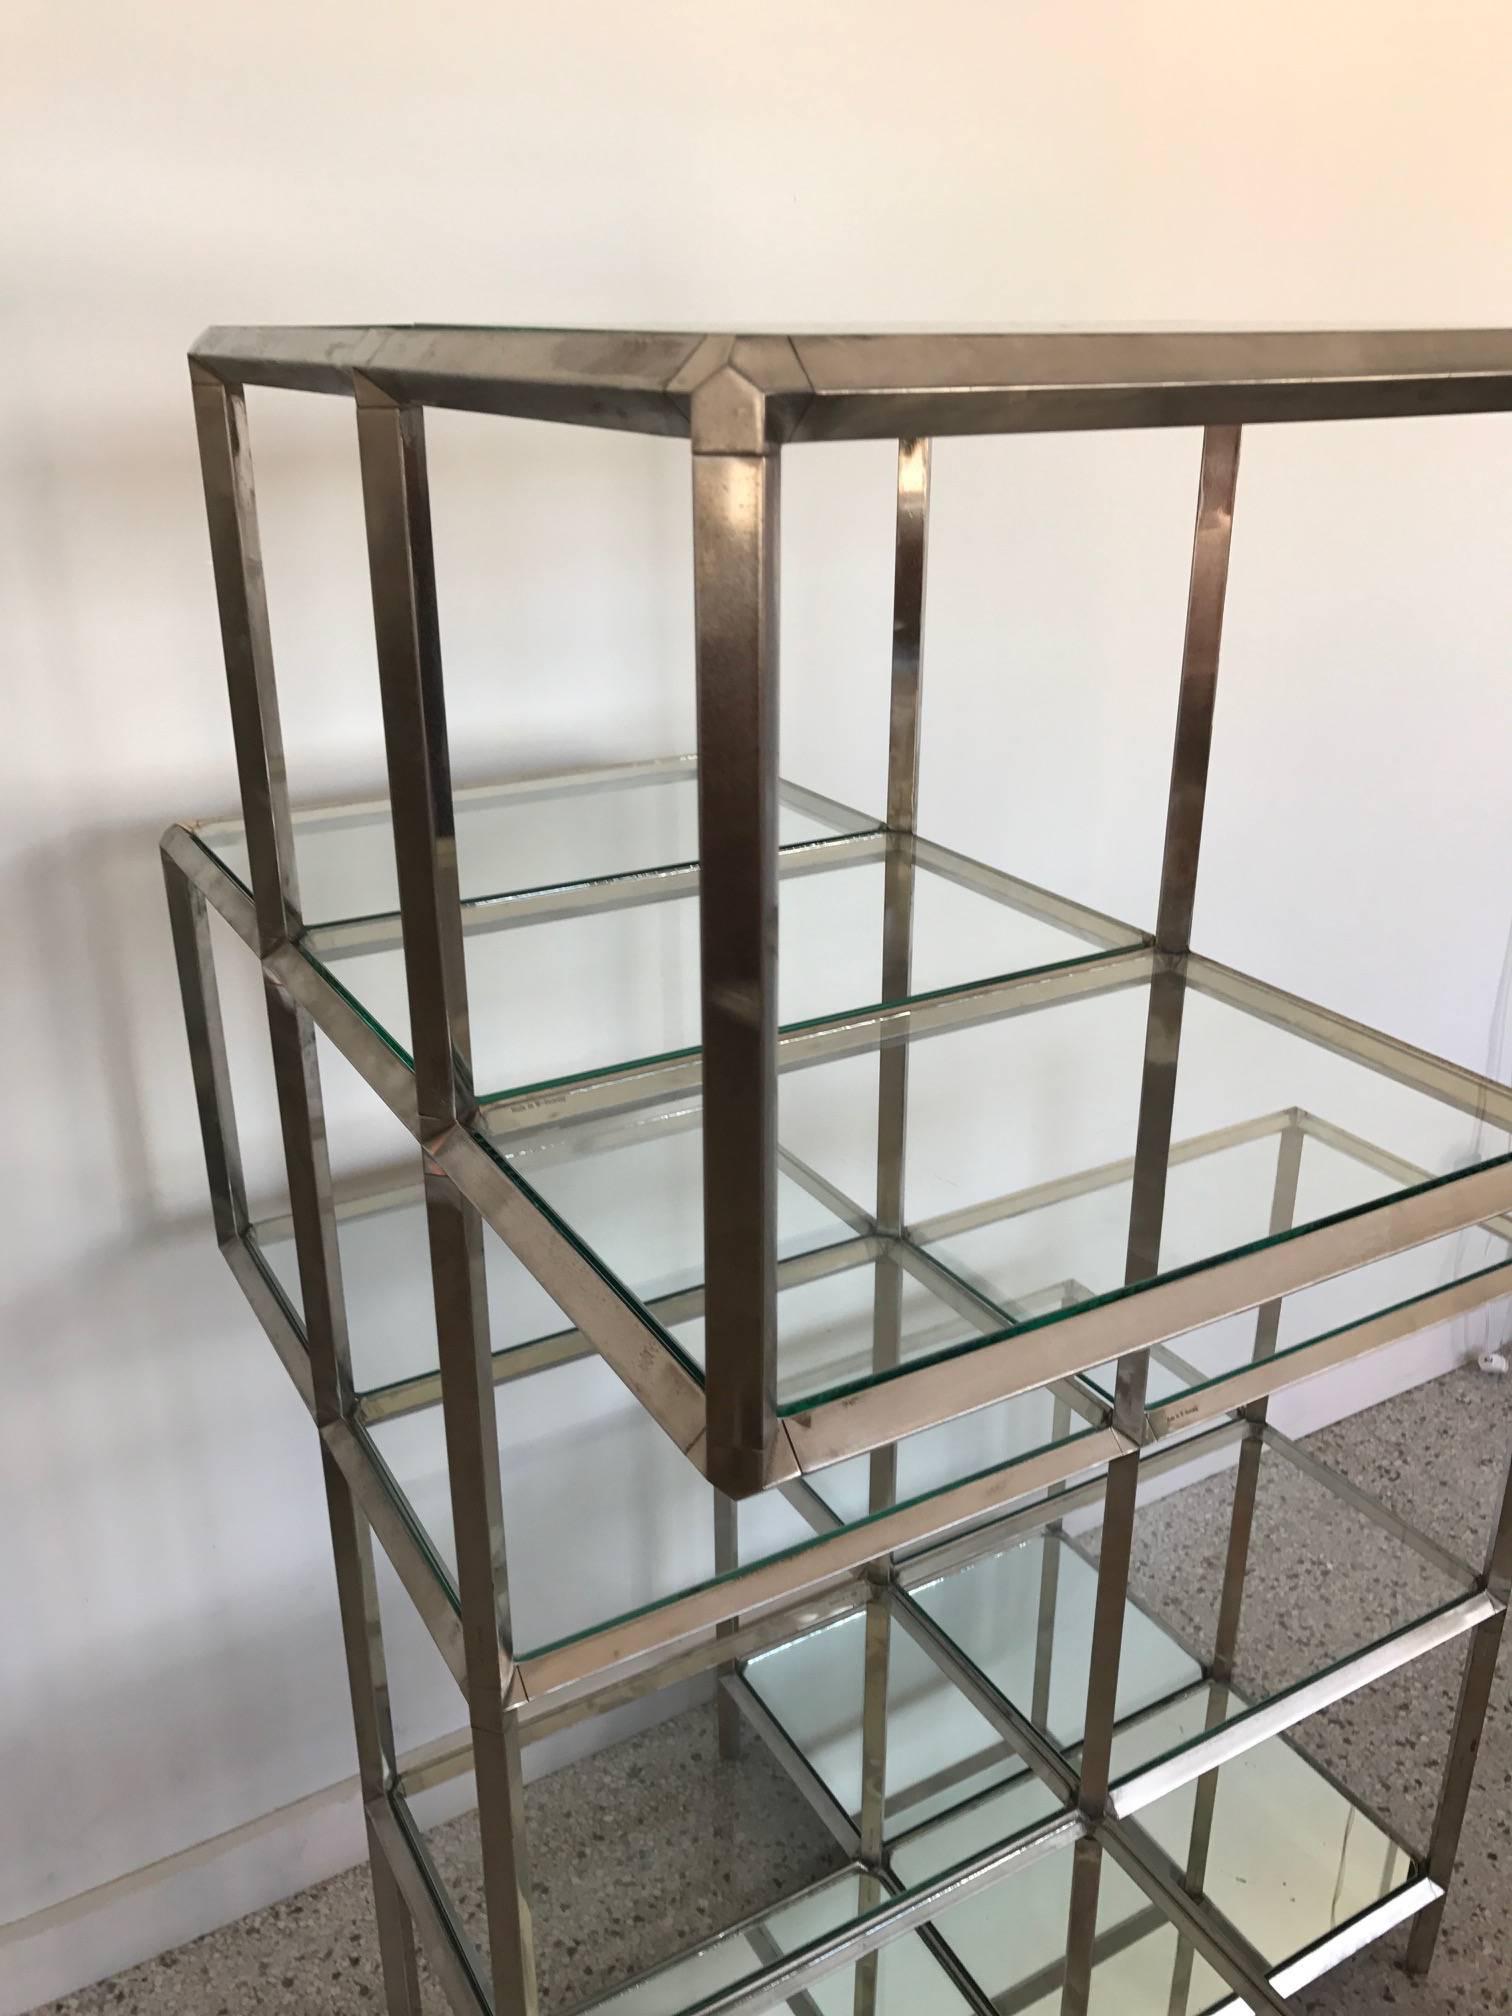 An unusual German (marked made in West Germany), chrome-plated etagere-display unit. Two identical available, priced separately. Lower shelves are mirrored glass-the rest are clear.